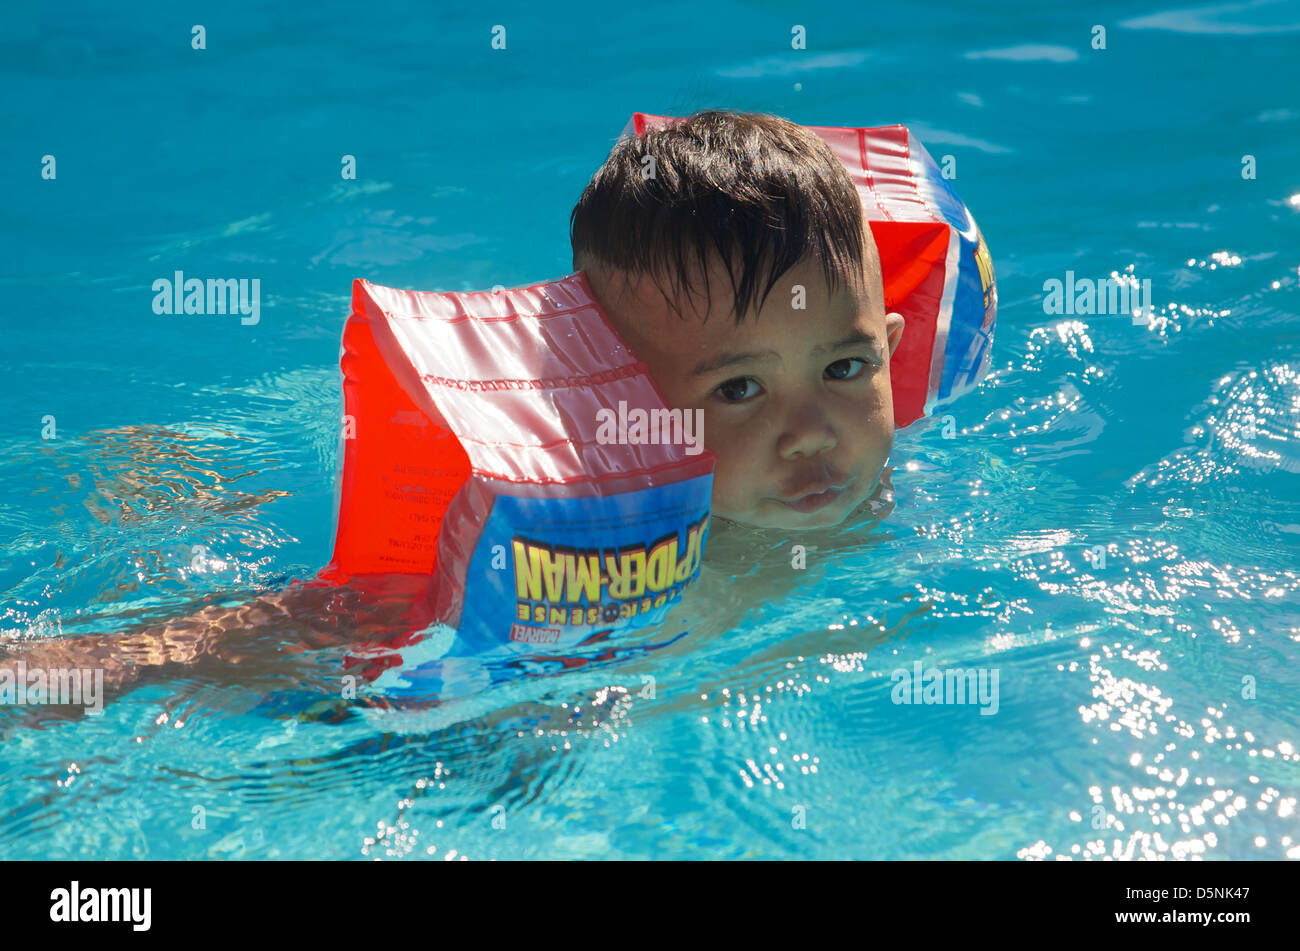 A 1 year old boy leaning to swim, Thailand Stock Photo